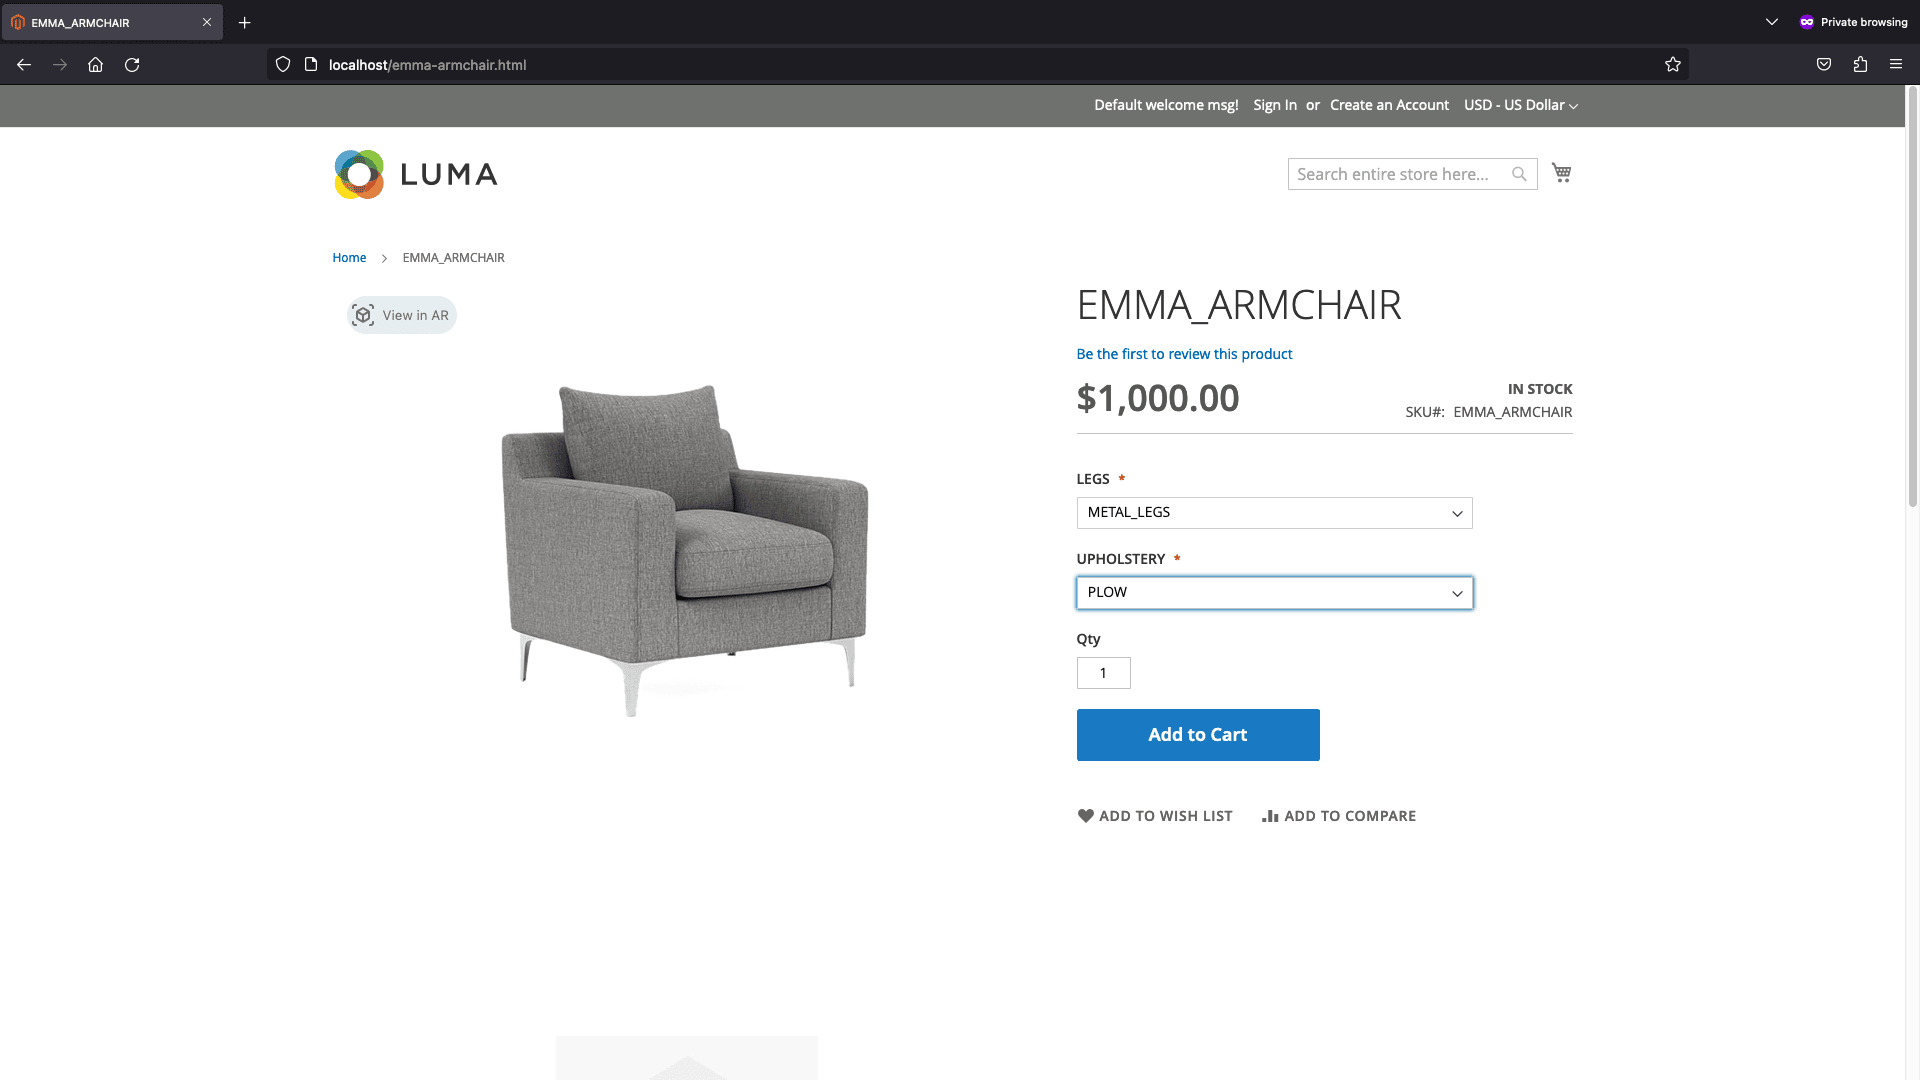 changing upholstery attribute on the product page